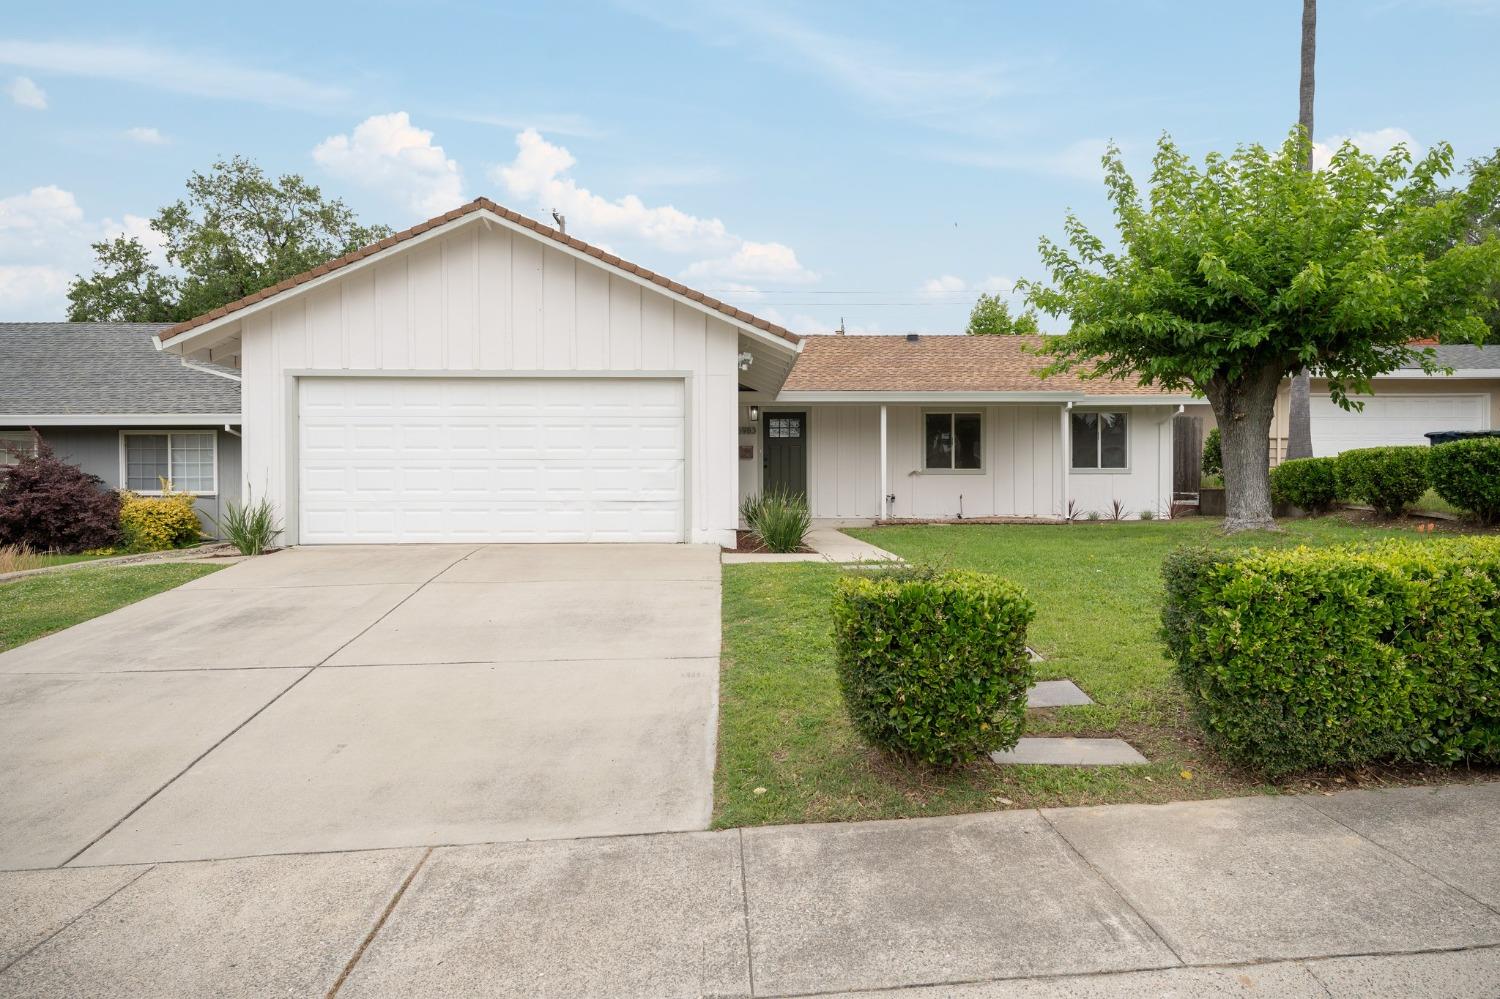 Photo of 6983 Greenbrook Cir in Citrus Heights, CA